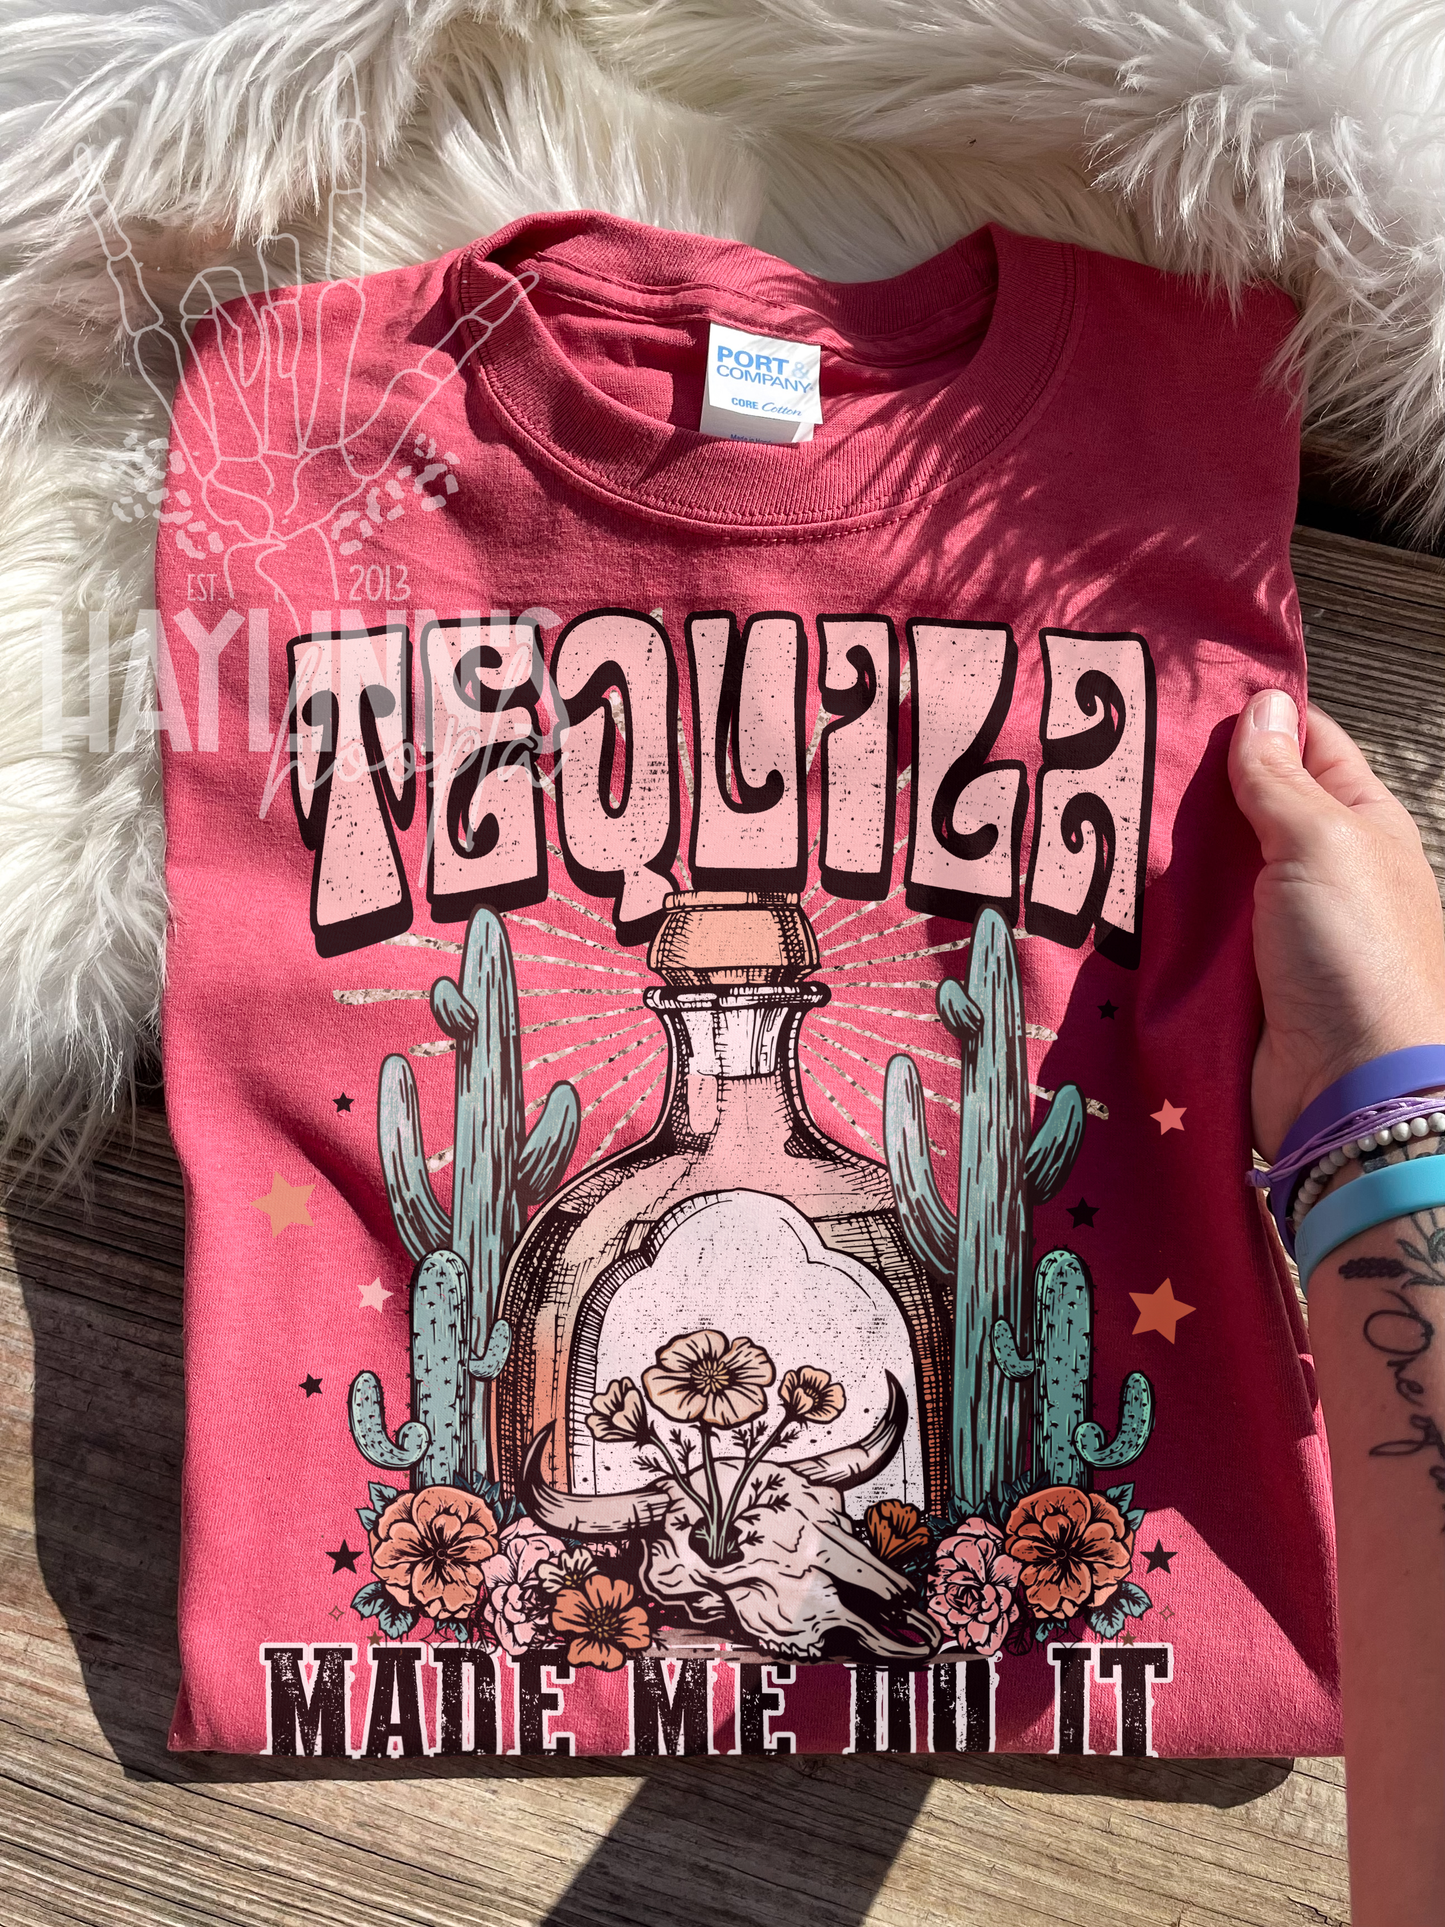 Tequila Made Me Do It Tee